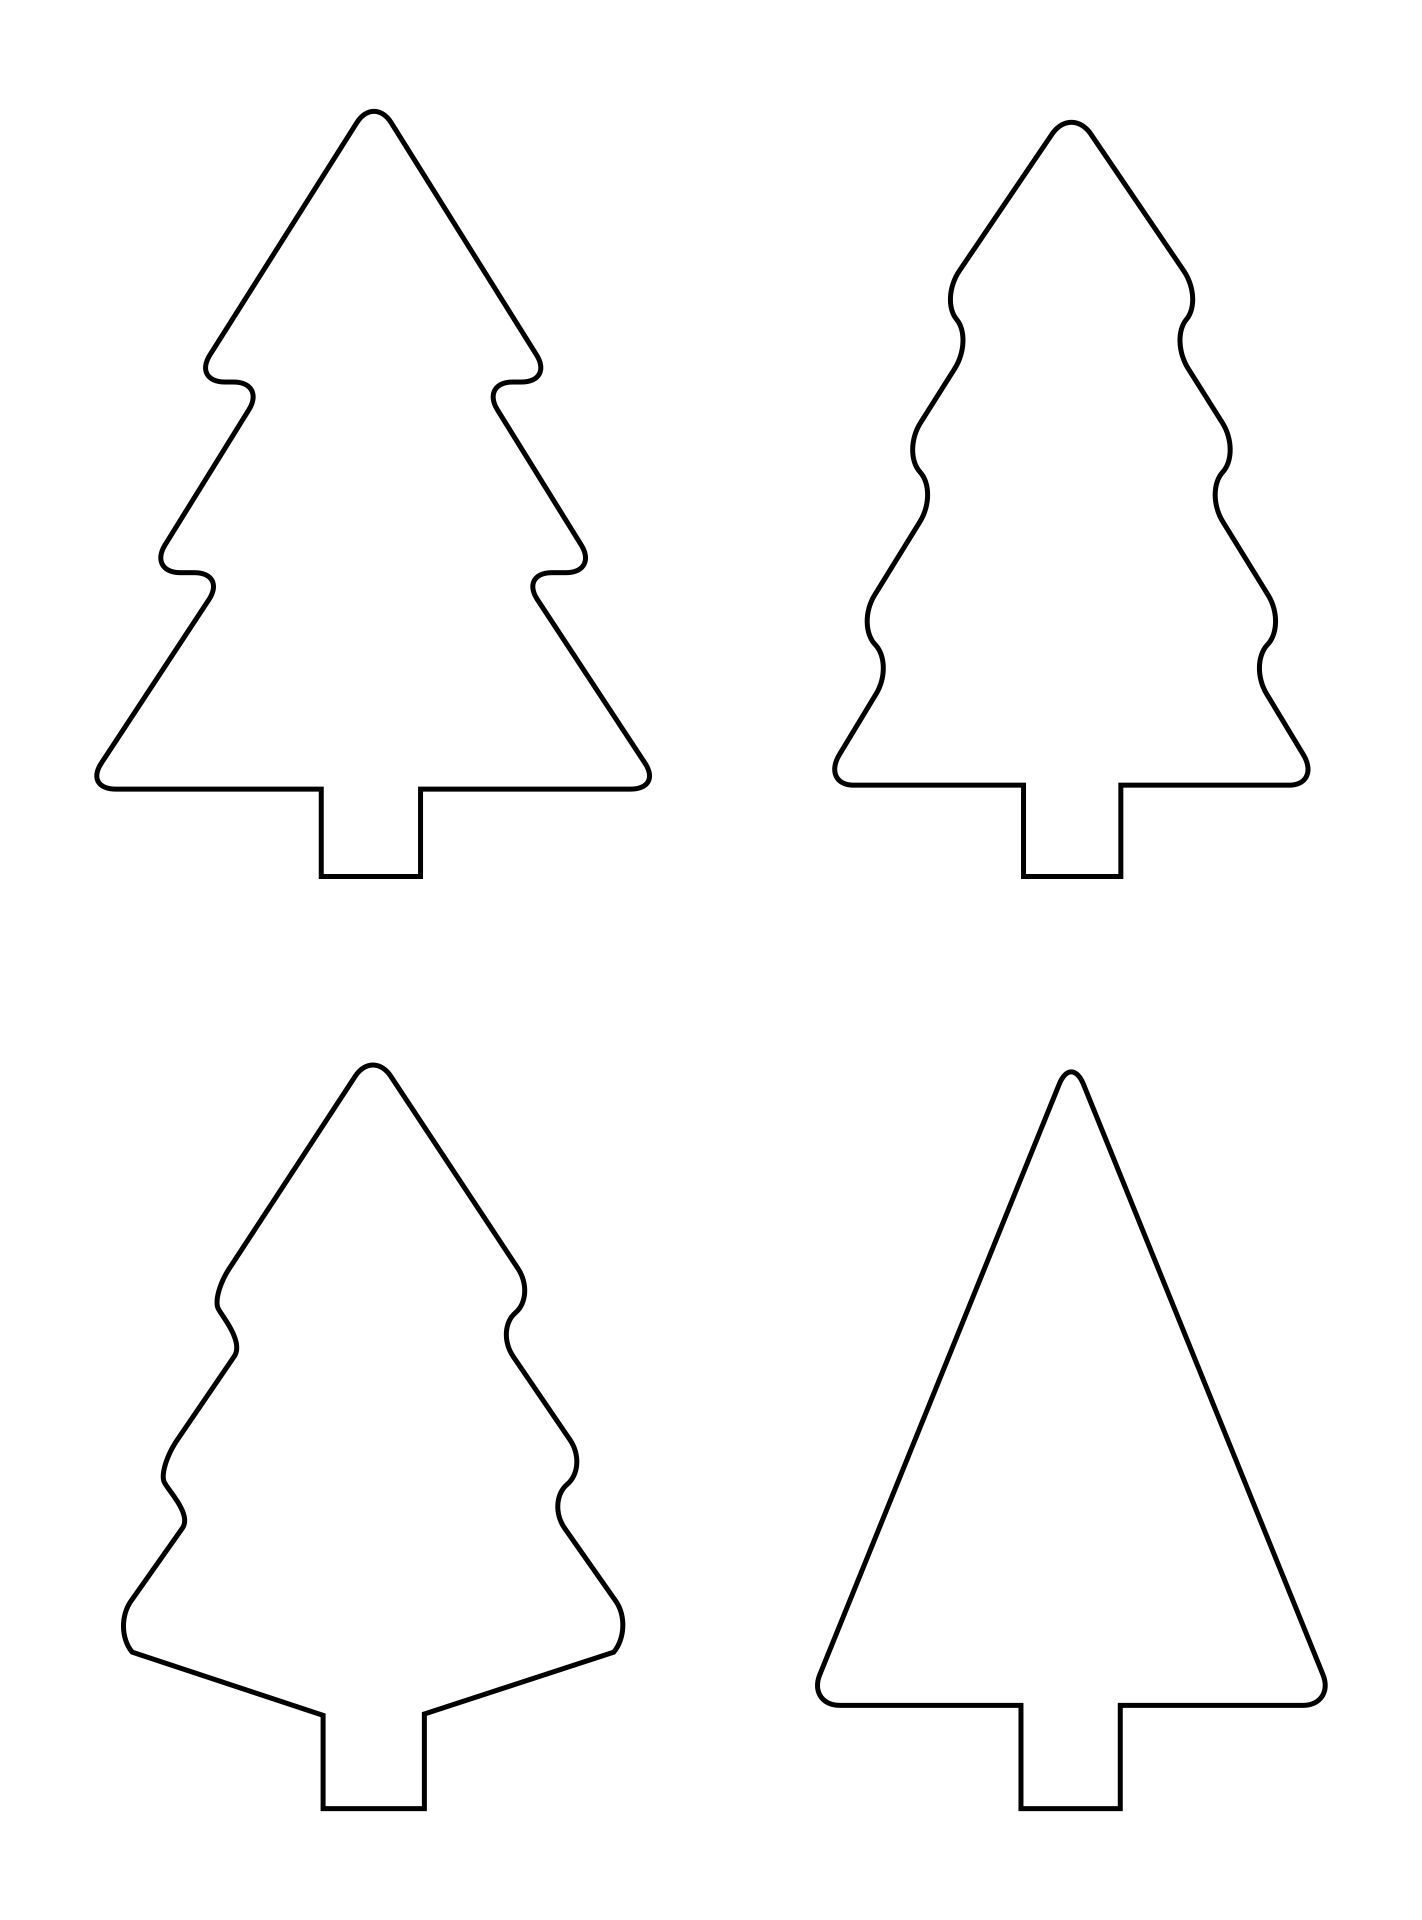 7-best-images-of-large-printable-christmas-tree-patterns-christmas-tree-outline-pattern